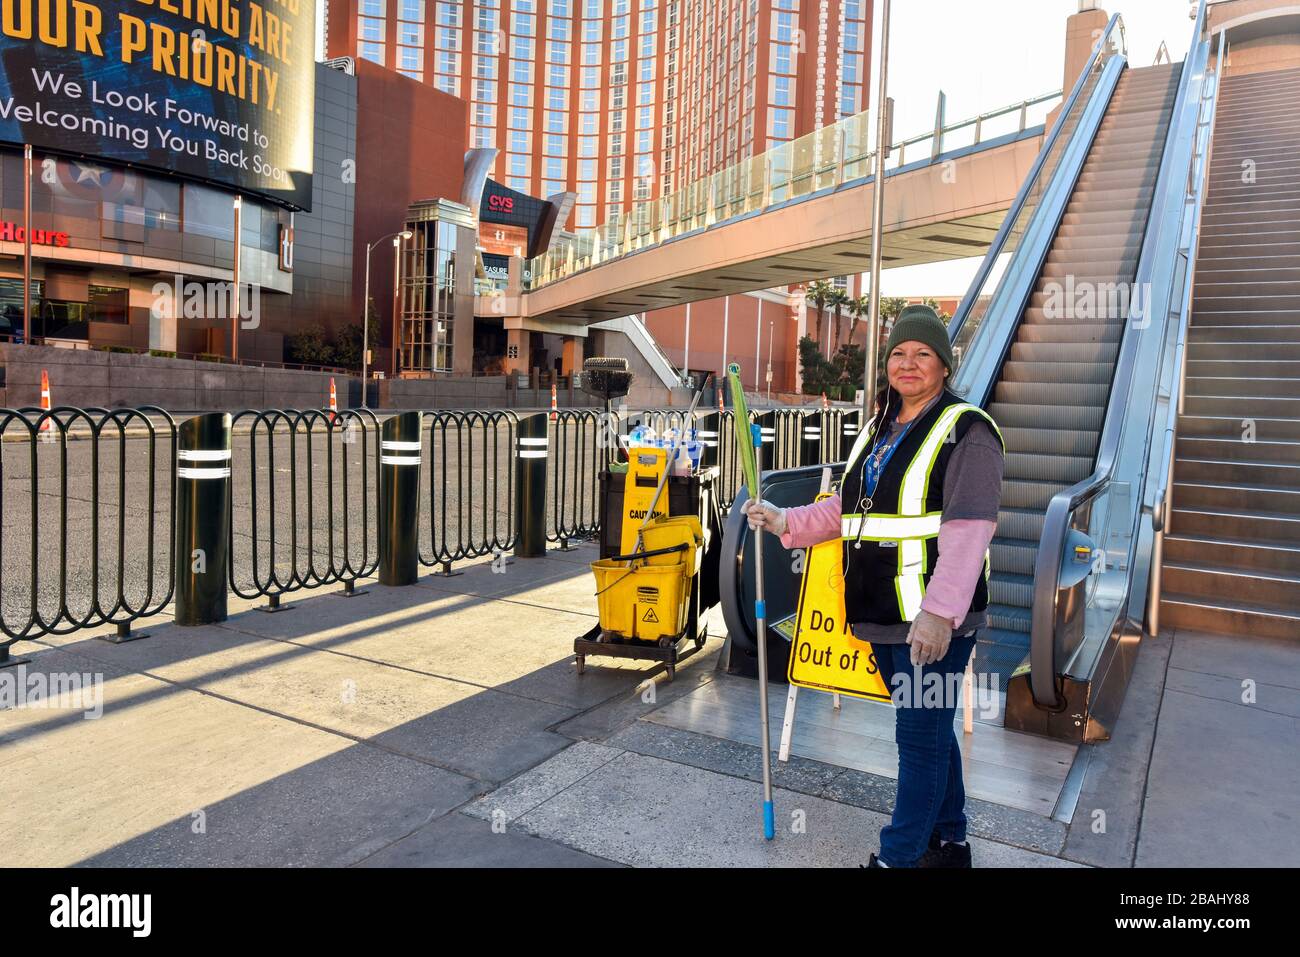 One week into the Las Vegas shut down due to Coronavirus, the Strip is fairly empty. Most residents seem to be heeding Governor Sisolak’s request you “Stay home for Nevada” with evidence of throughout Clark County, NV. Cleaning crew keeping up with the street maintenance and cleaning the public areas while the streets are empty. Photo Credit: Ken Howard/Alamy Stock Photo